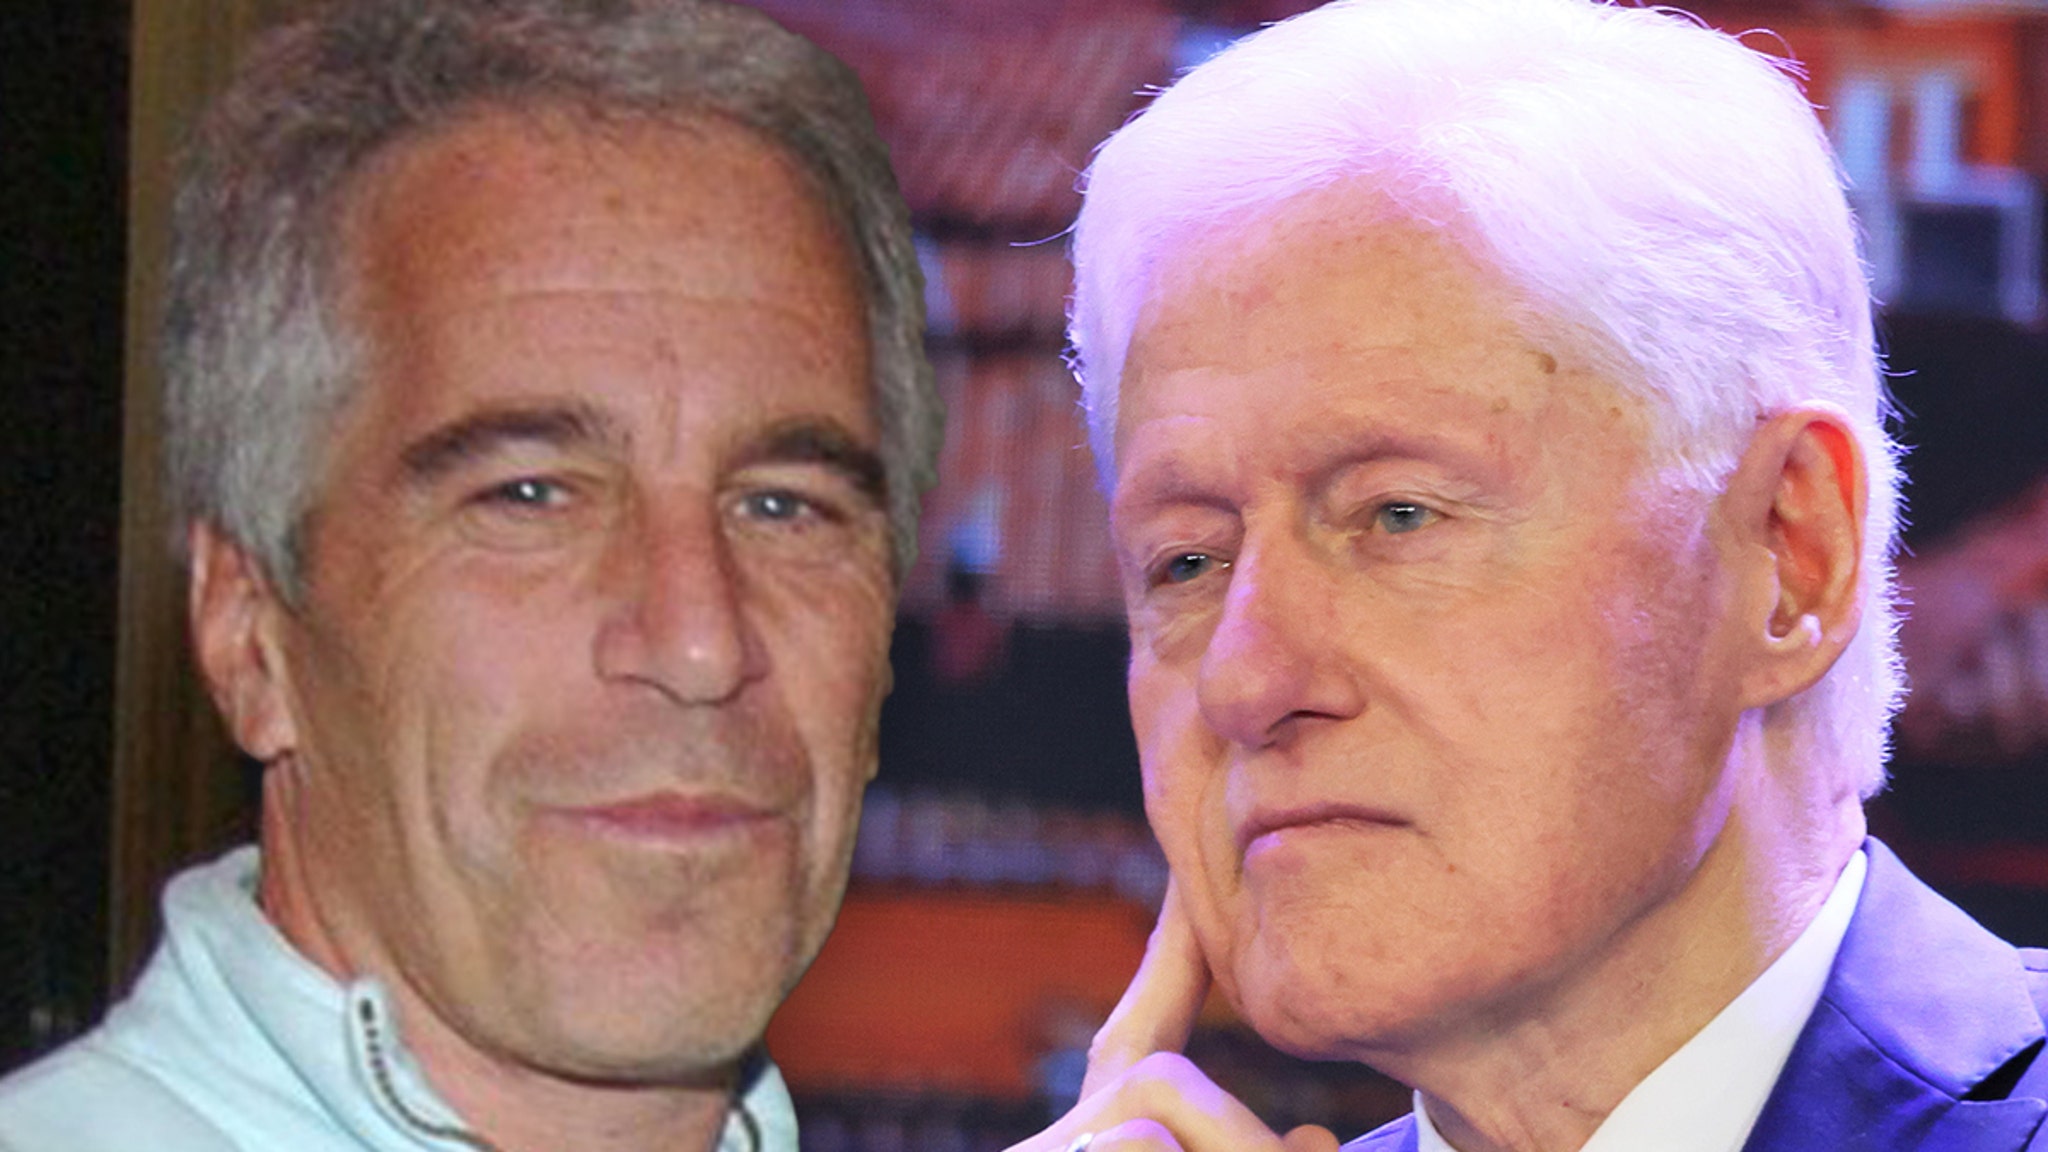 Jeffrey Epstein Told Victim Bill Clinton ‘Likes Them Young’